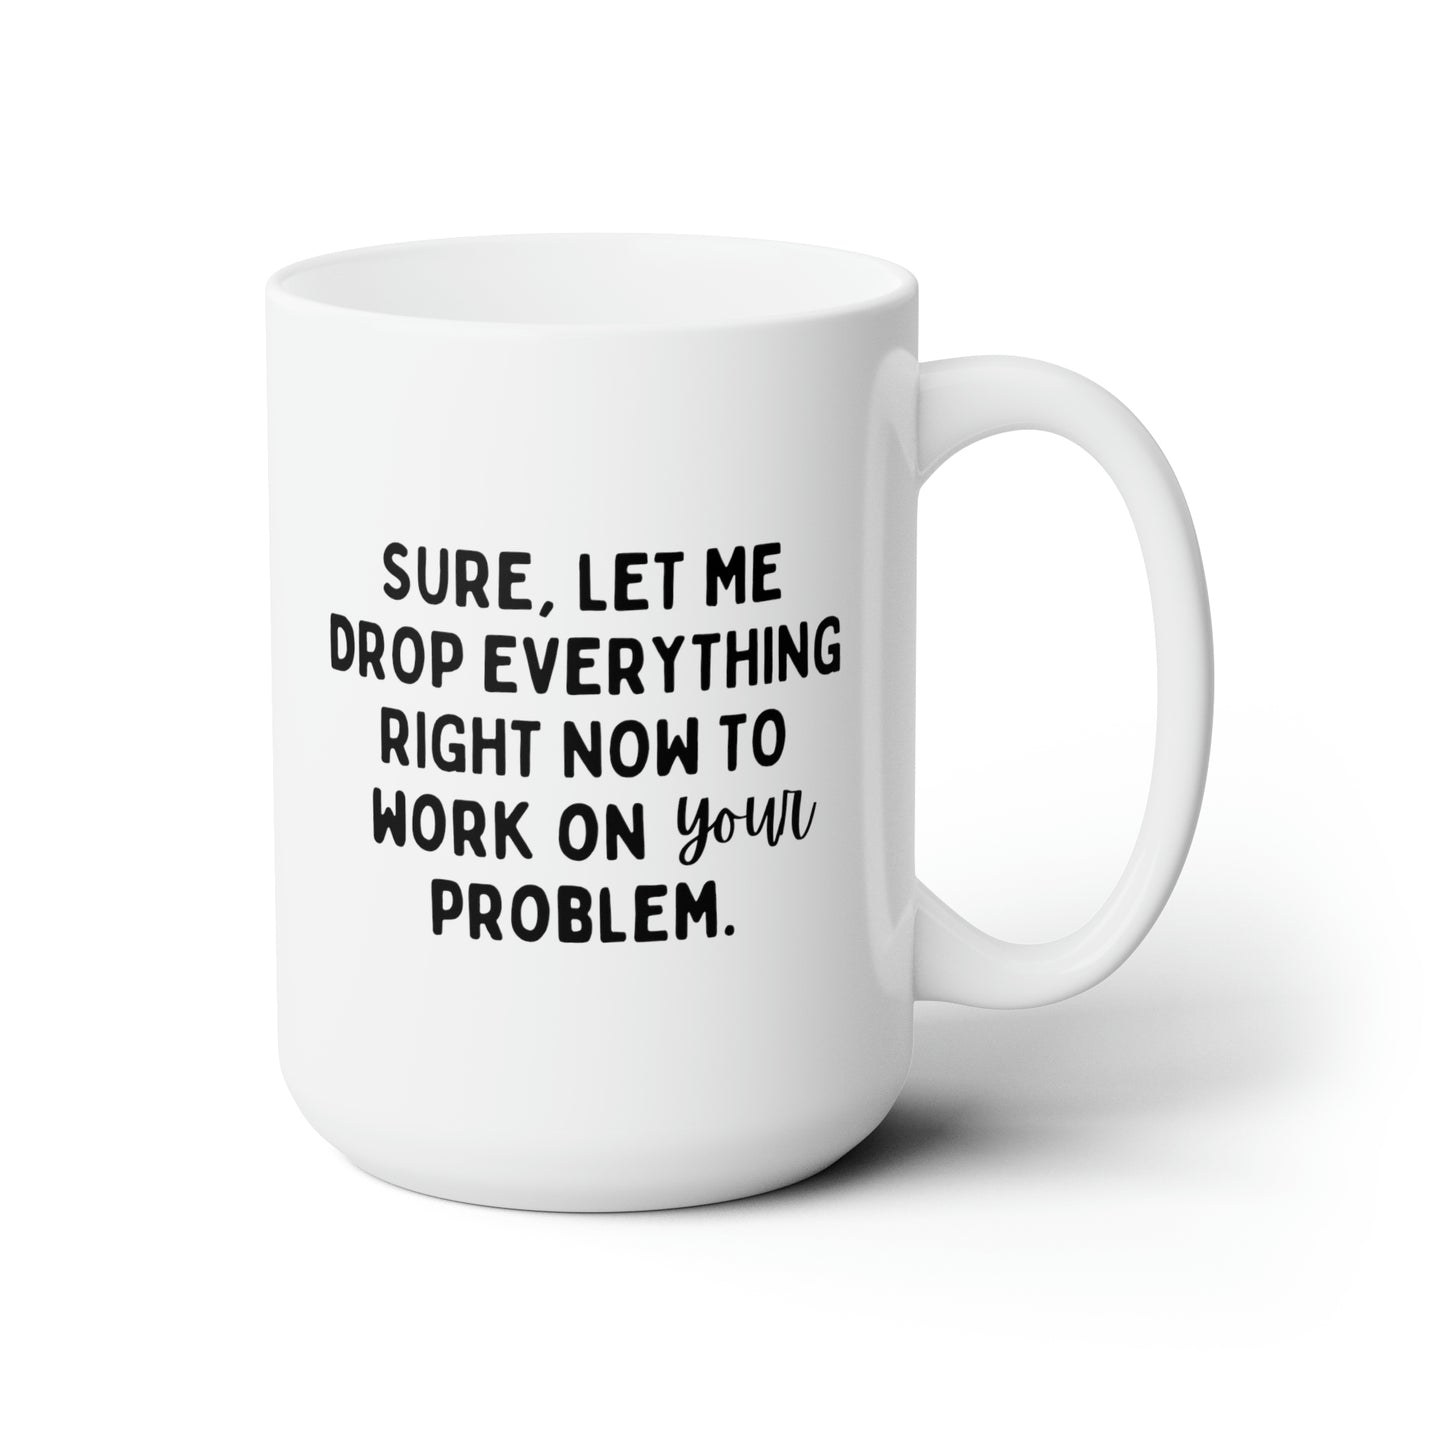 Sure Let Me Drop Everything Right Now To Work On Your Problem 15oz white funny large coffee mug gift for boss coworker colleague hate job office sarcastic waveywares wavey wares wavywares wavy wares